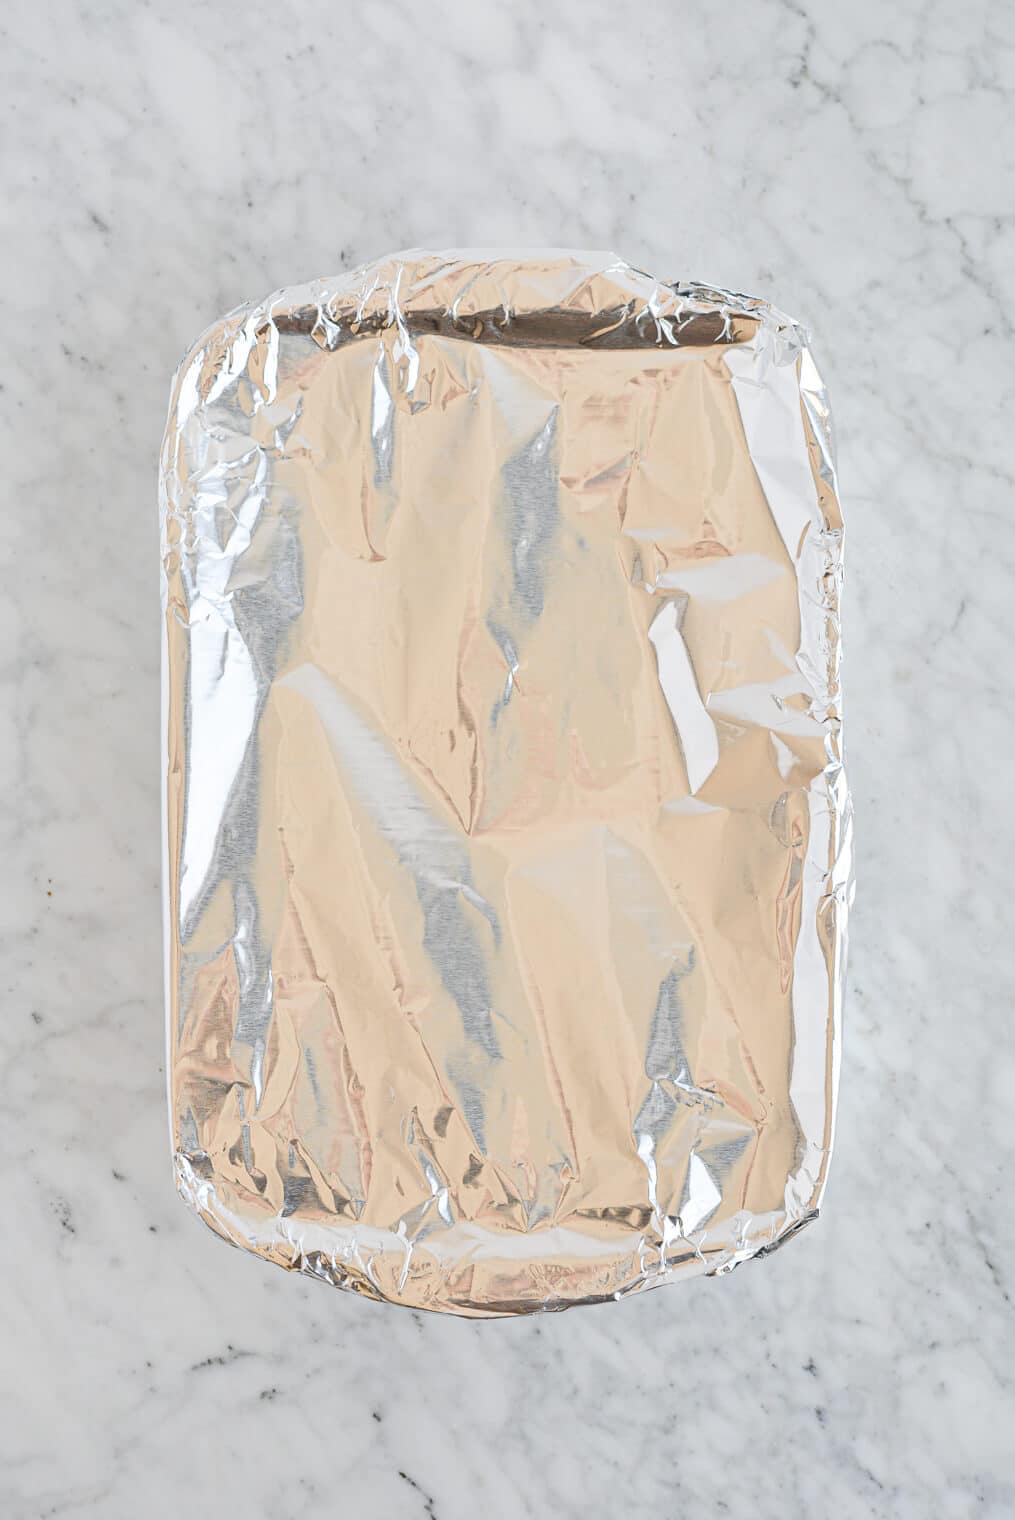 the top view of a foil covered casserole dish sitting on a marble surface